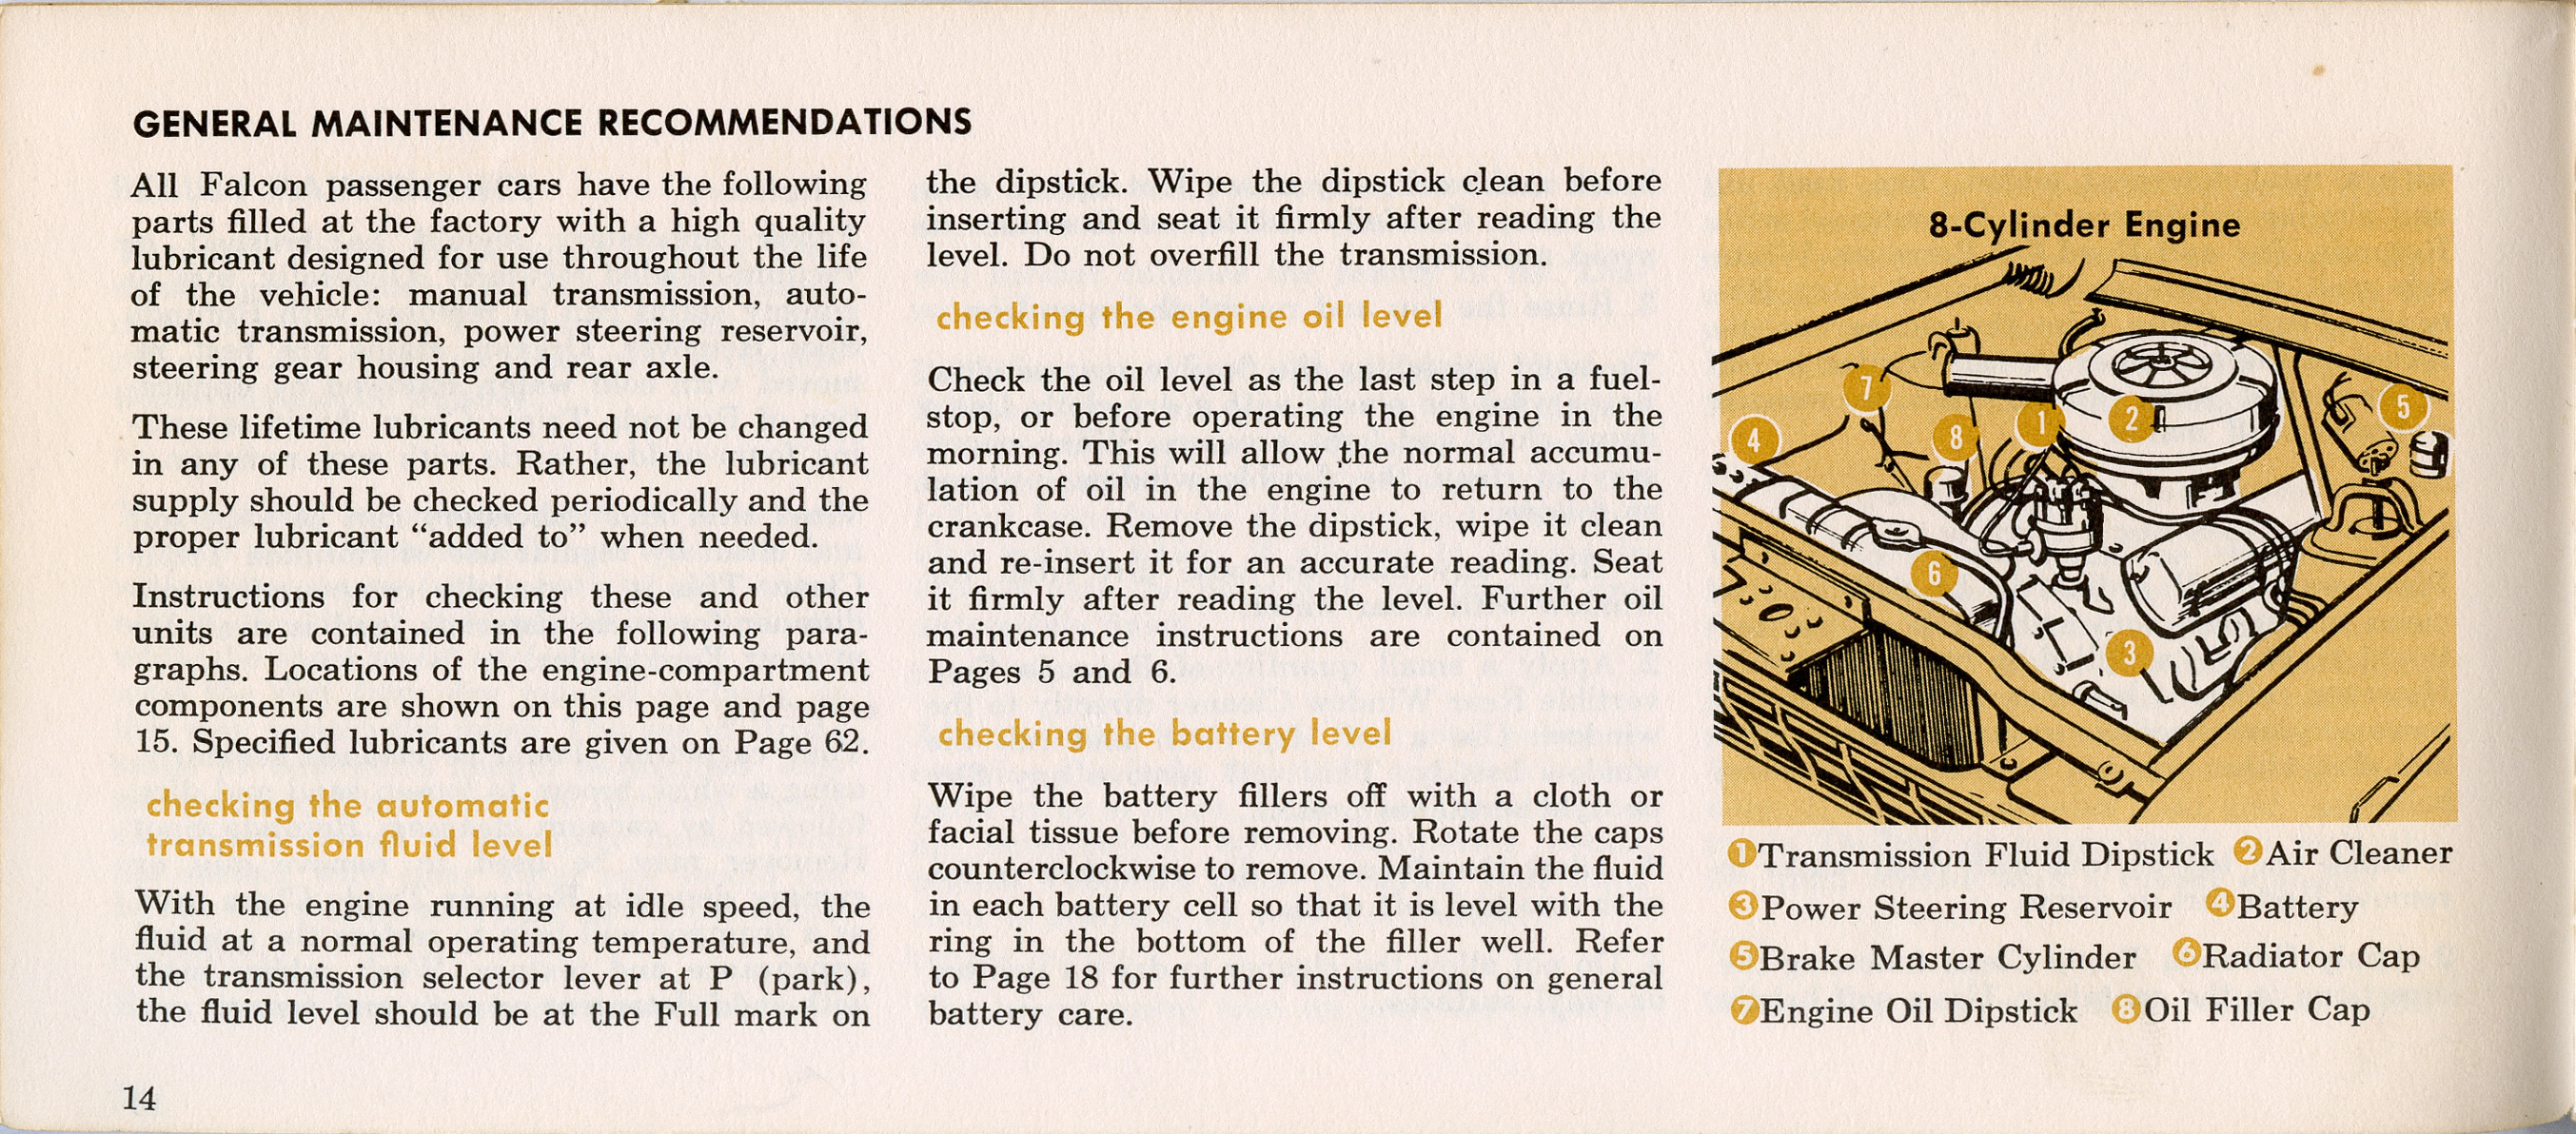 1964 Ford Falcon Owners Manual-14